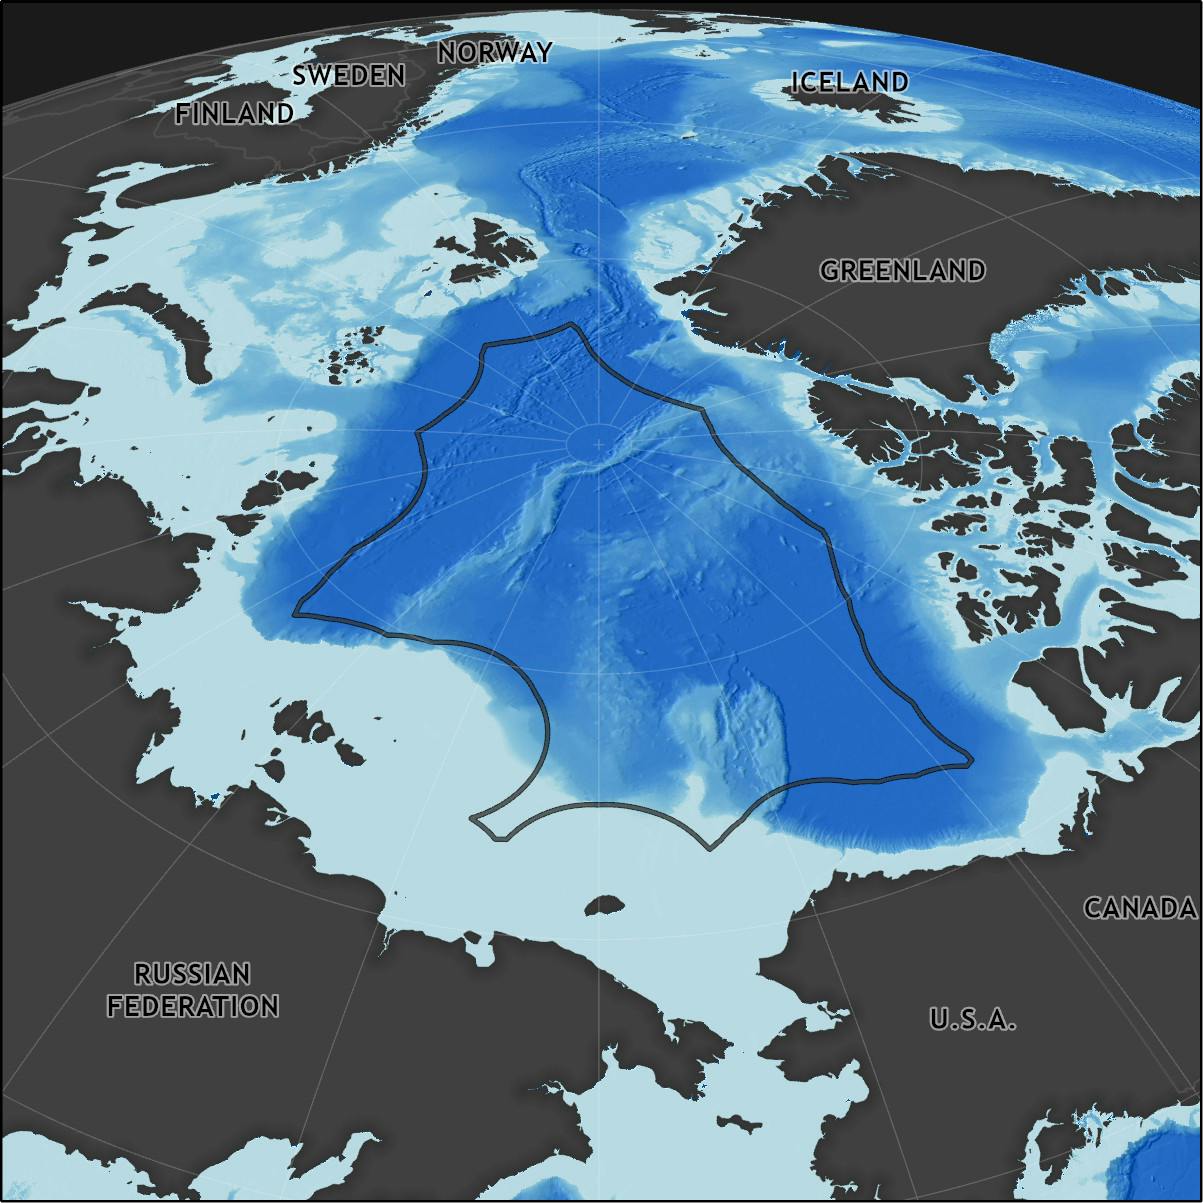 New Central Arctic Ocean Protections